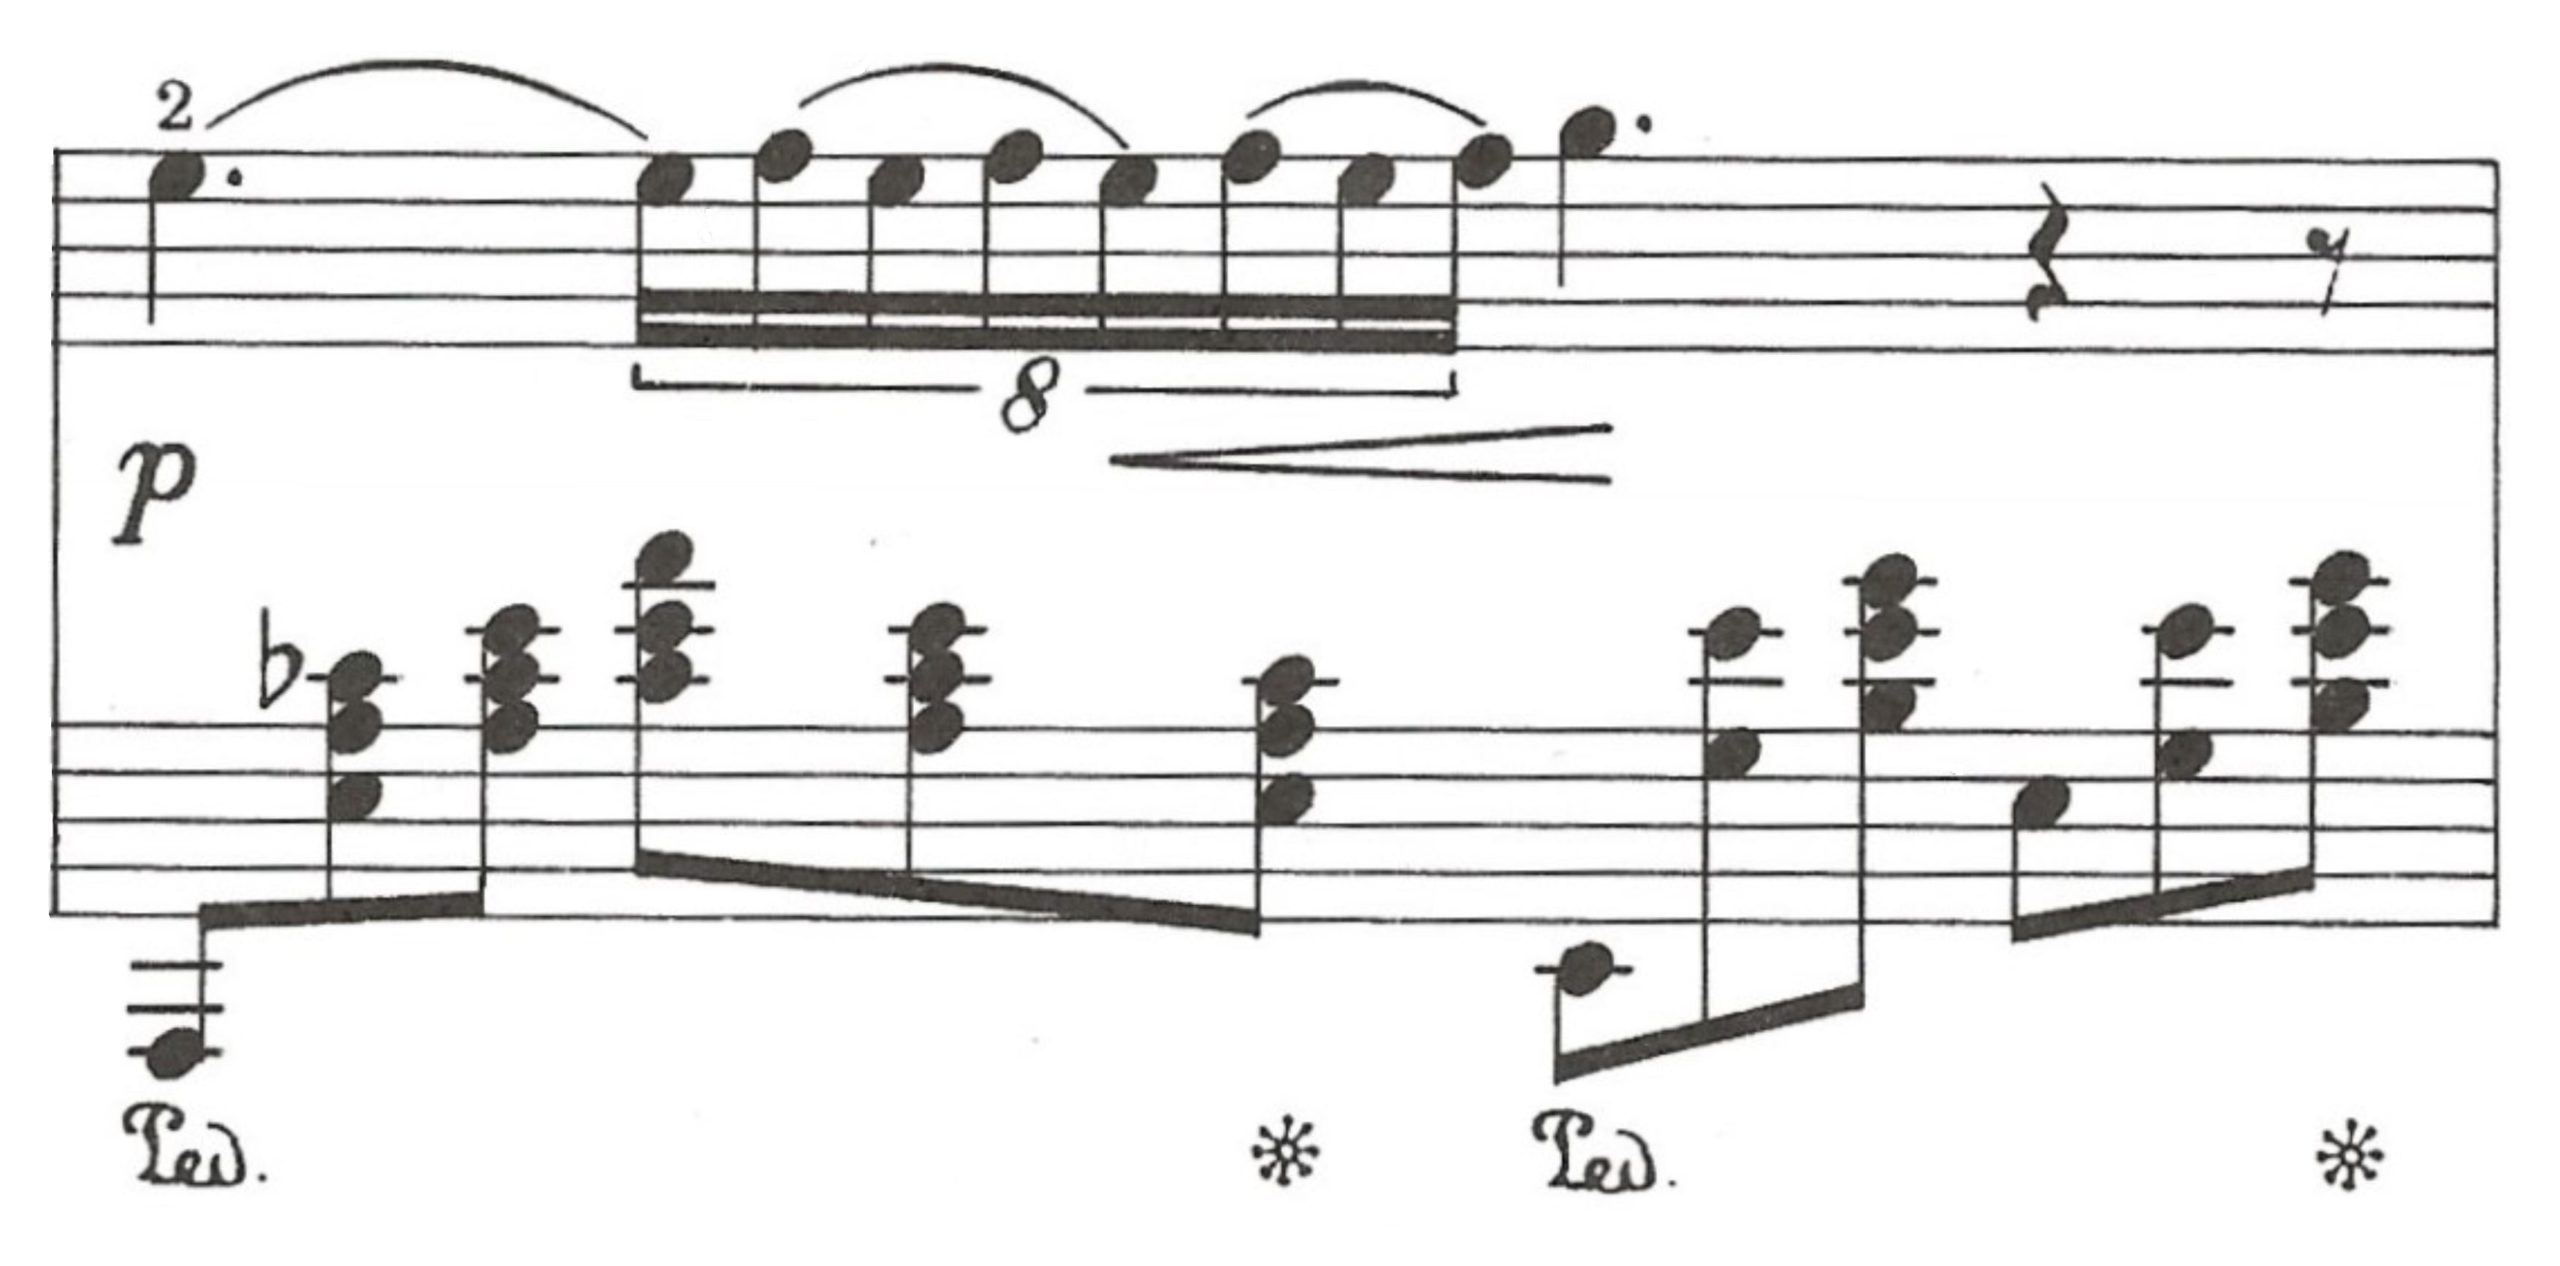 "Chopin Nocturne in E-flat Major, Op. 9, No. 2," from The Creative Pianist